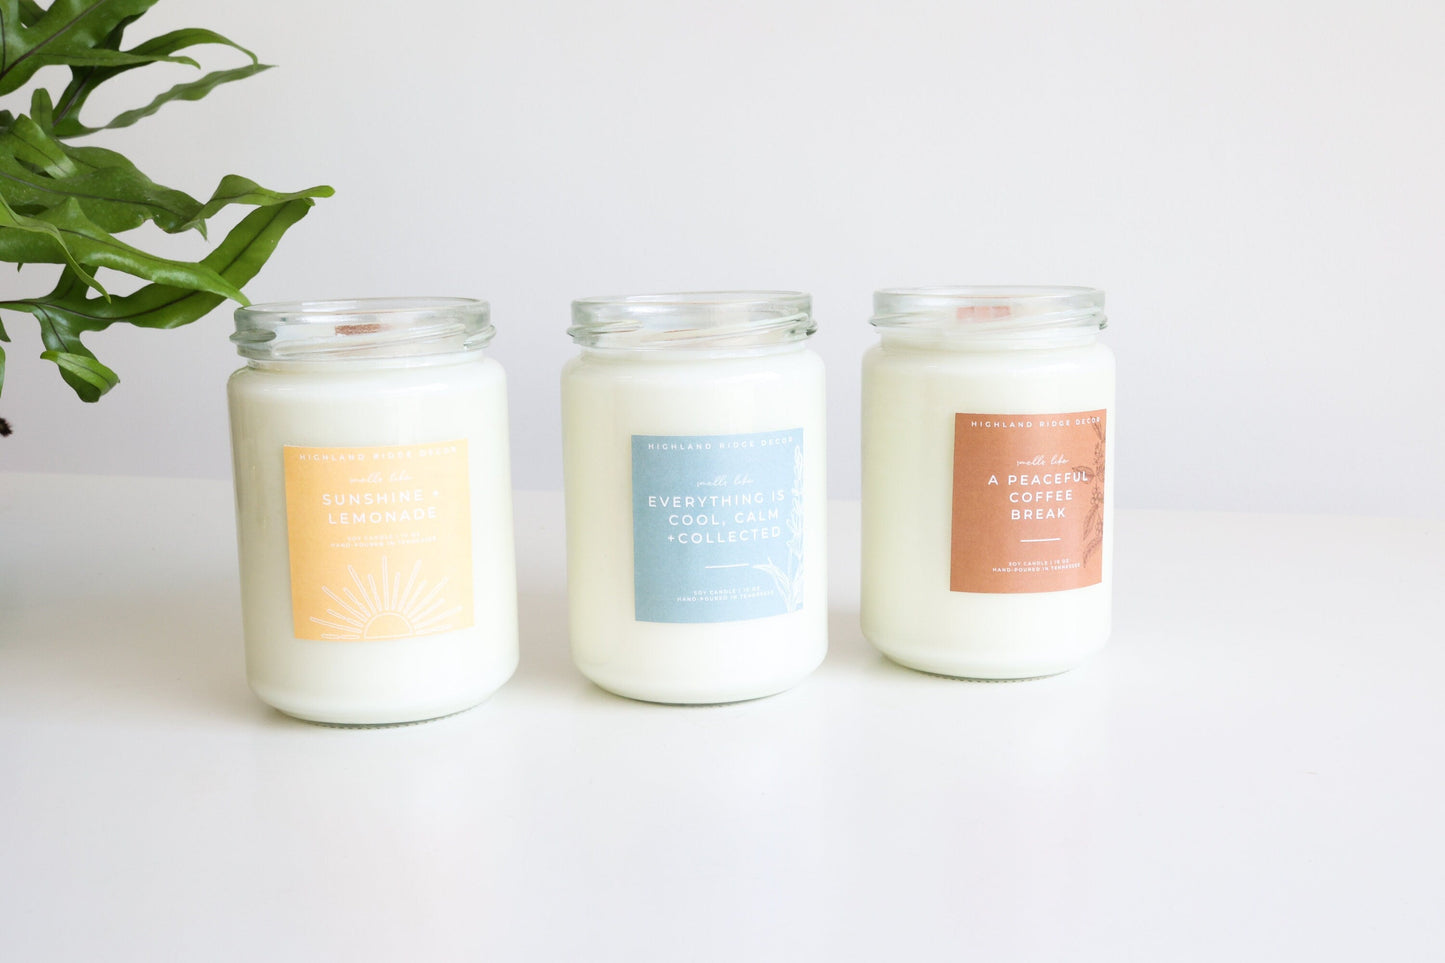 "Everything is Cool, Calm + Collected" Candle.